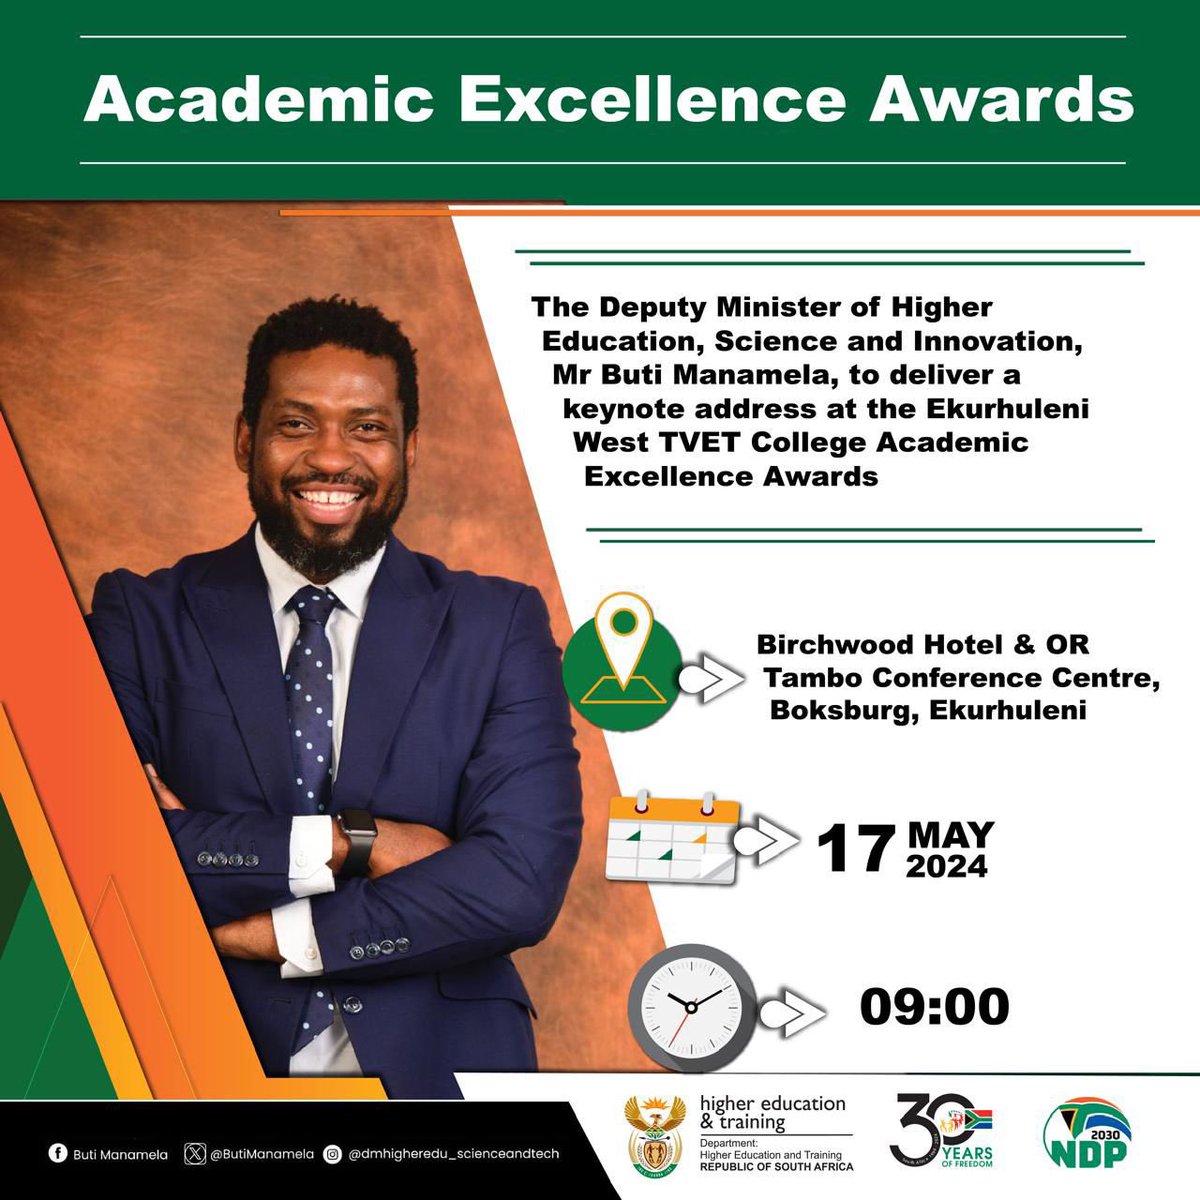 The Deputy Minister of Higher Education, Science and Innovation, @ButiManamela , will this morning deliver a keynote address at the Ekurhuleni West TVET College’s 2024 Academic Excellence Awards ceremony. #2024AcademicExcellenceAwards #CelebratingExcellence